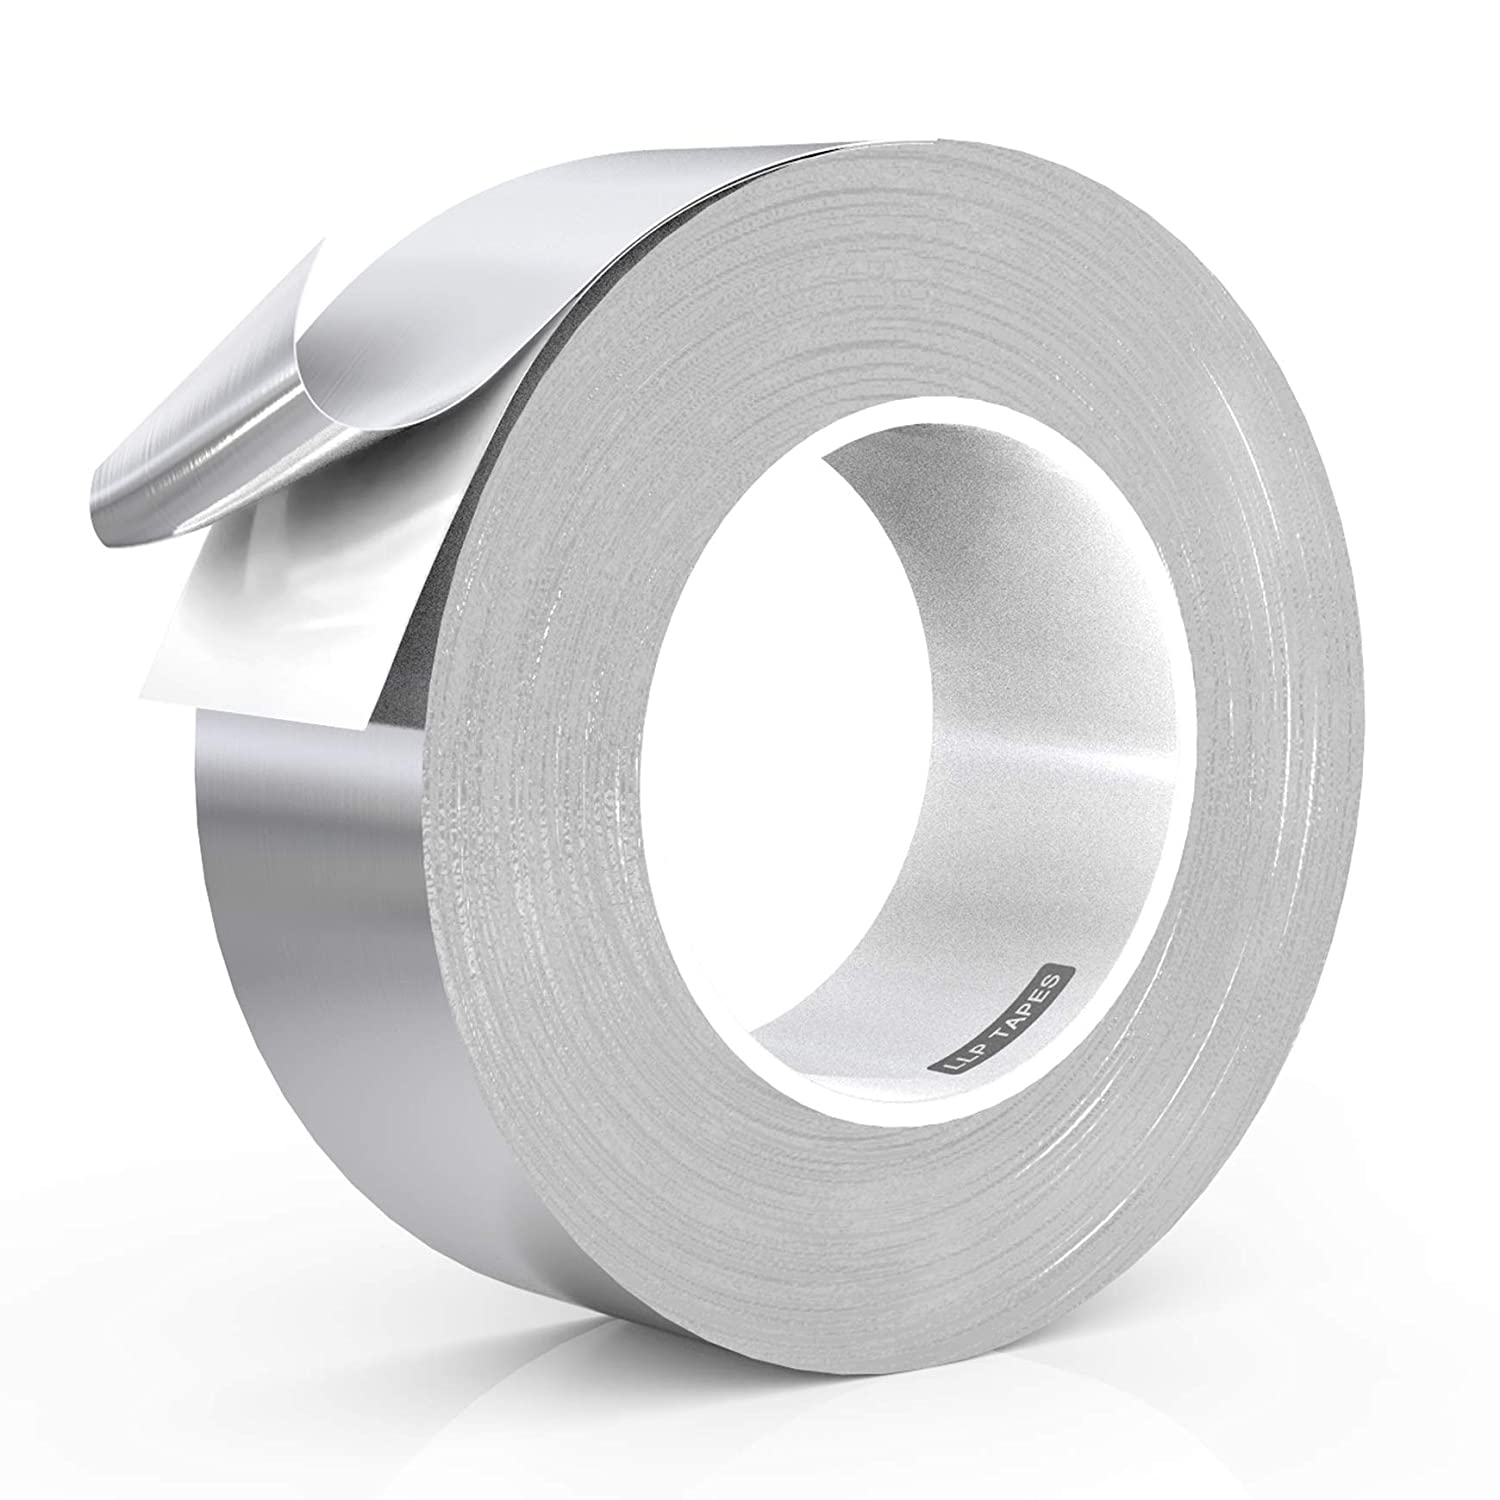 LLPT, LLPT Aluminum Foil Tape 2 Inches x 55 Yards 3.94 Mil High Temp Heavy Duty Adhesive HVAC Sealing Hot Cold Air Duct Tape for Pipe Metal Repair (A2155)